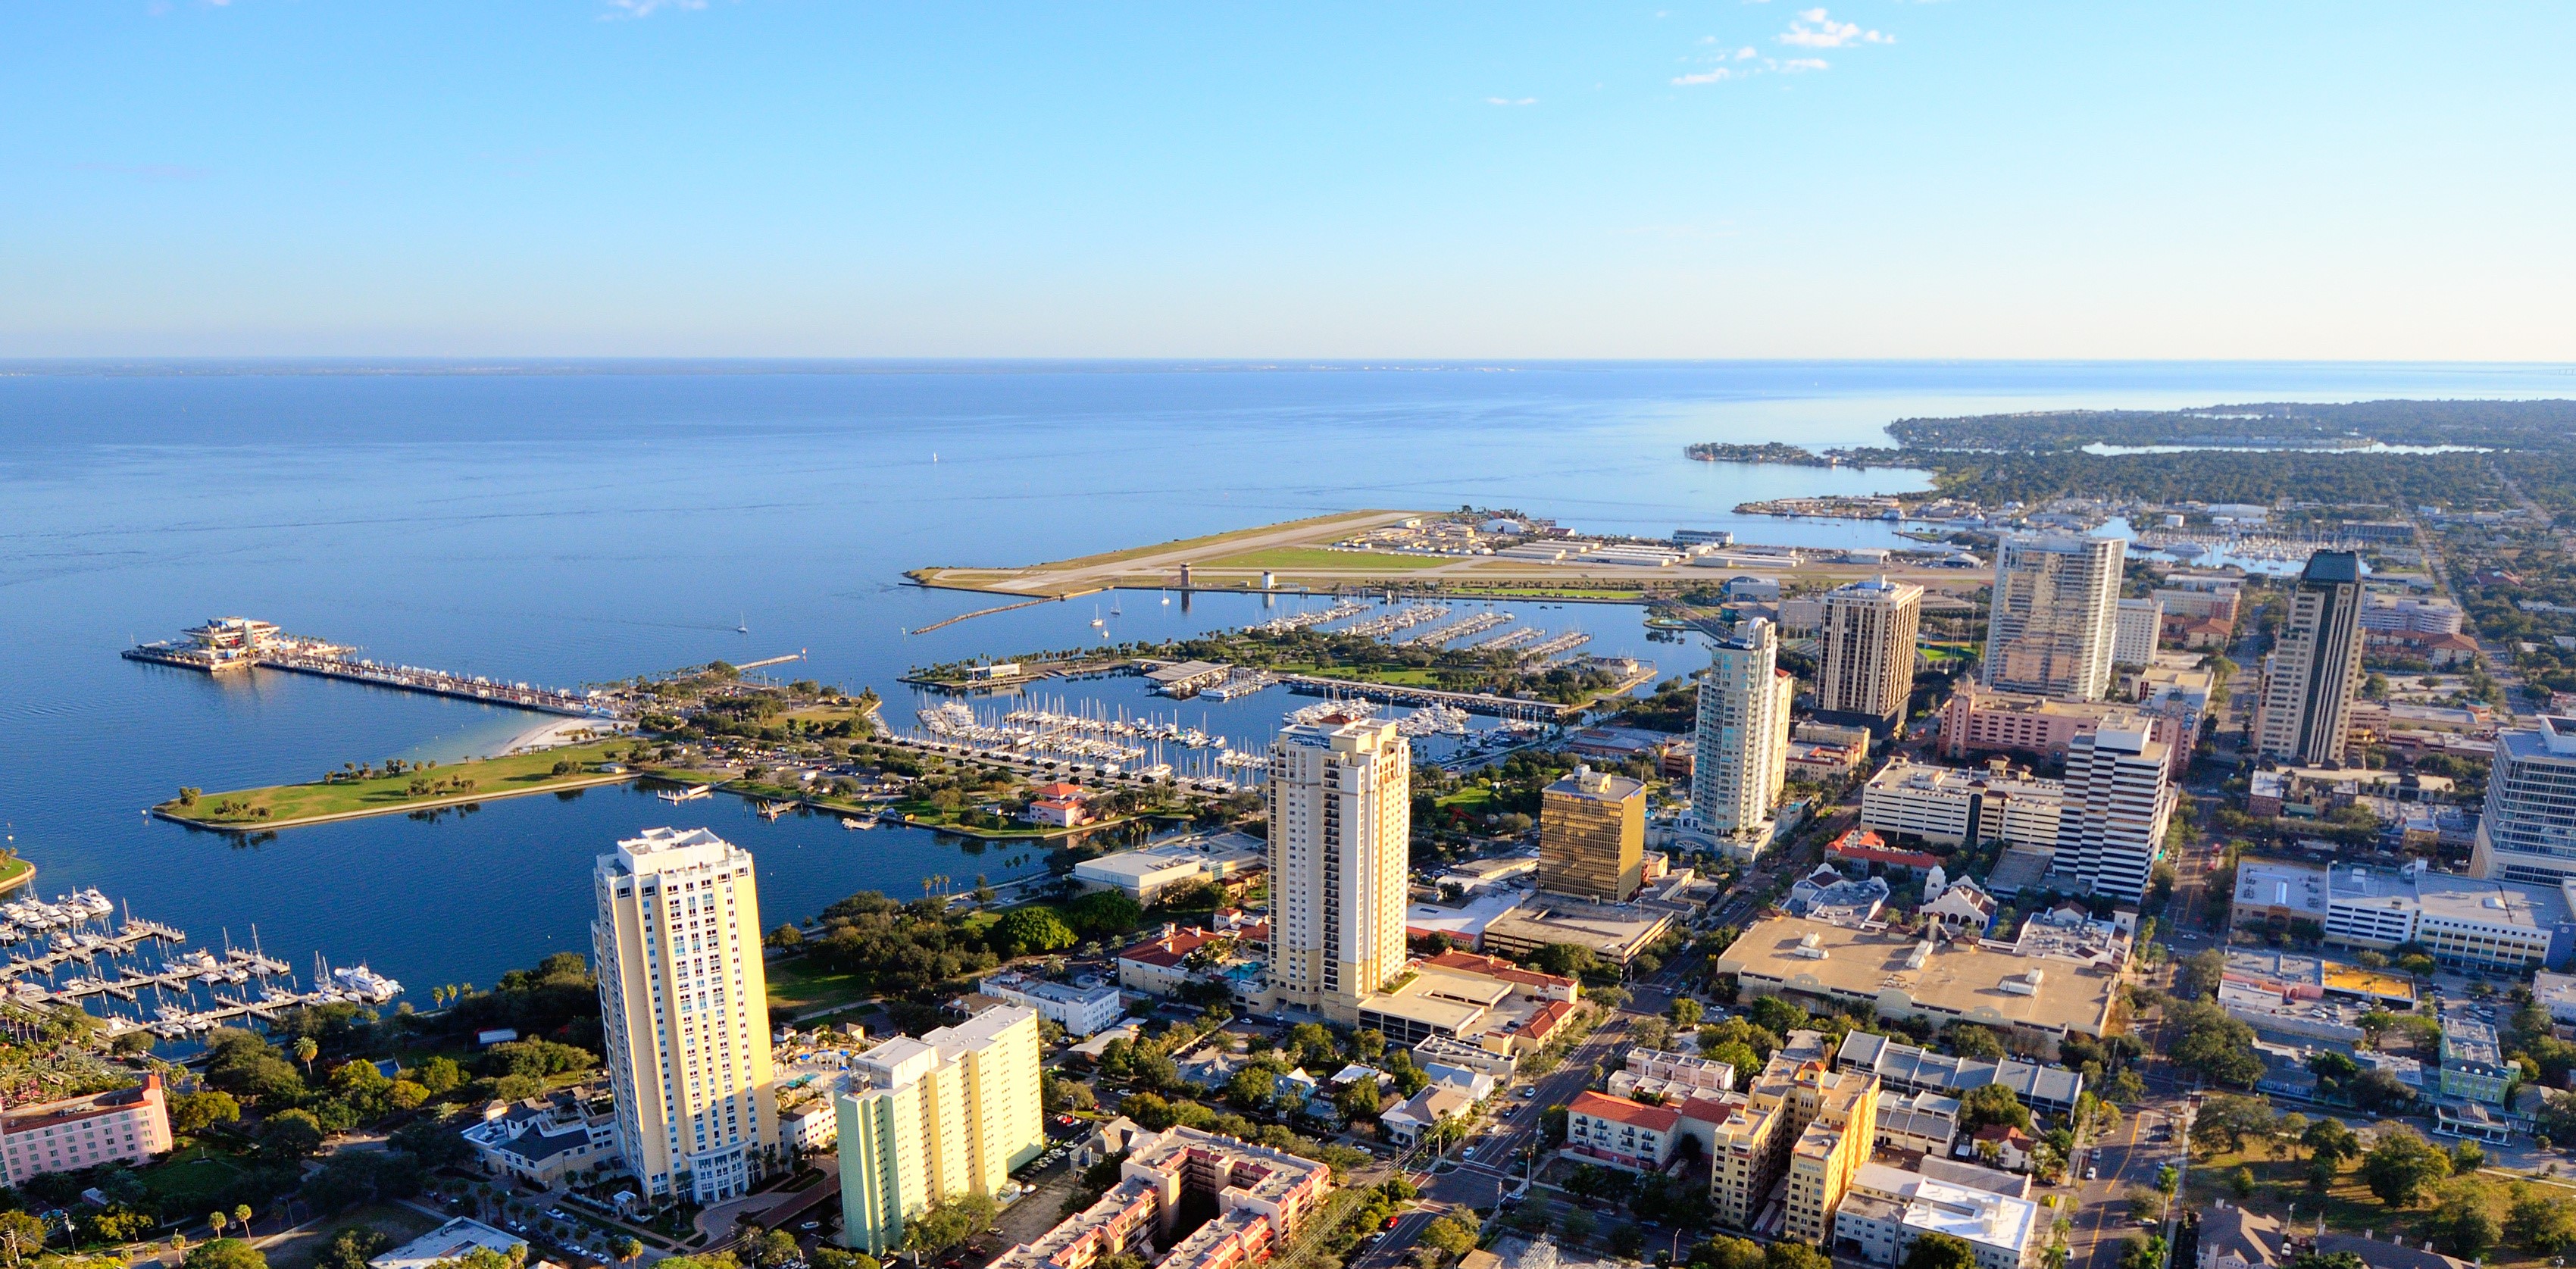 Aerial photo of the city of Miami with ocean in the background